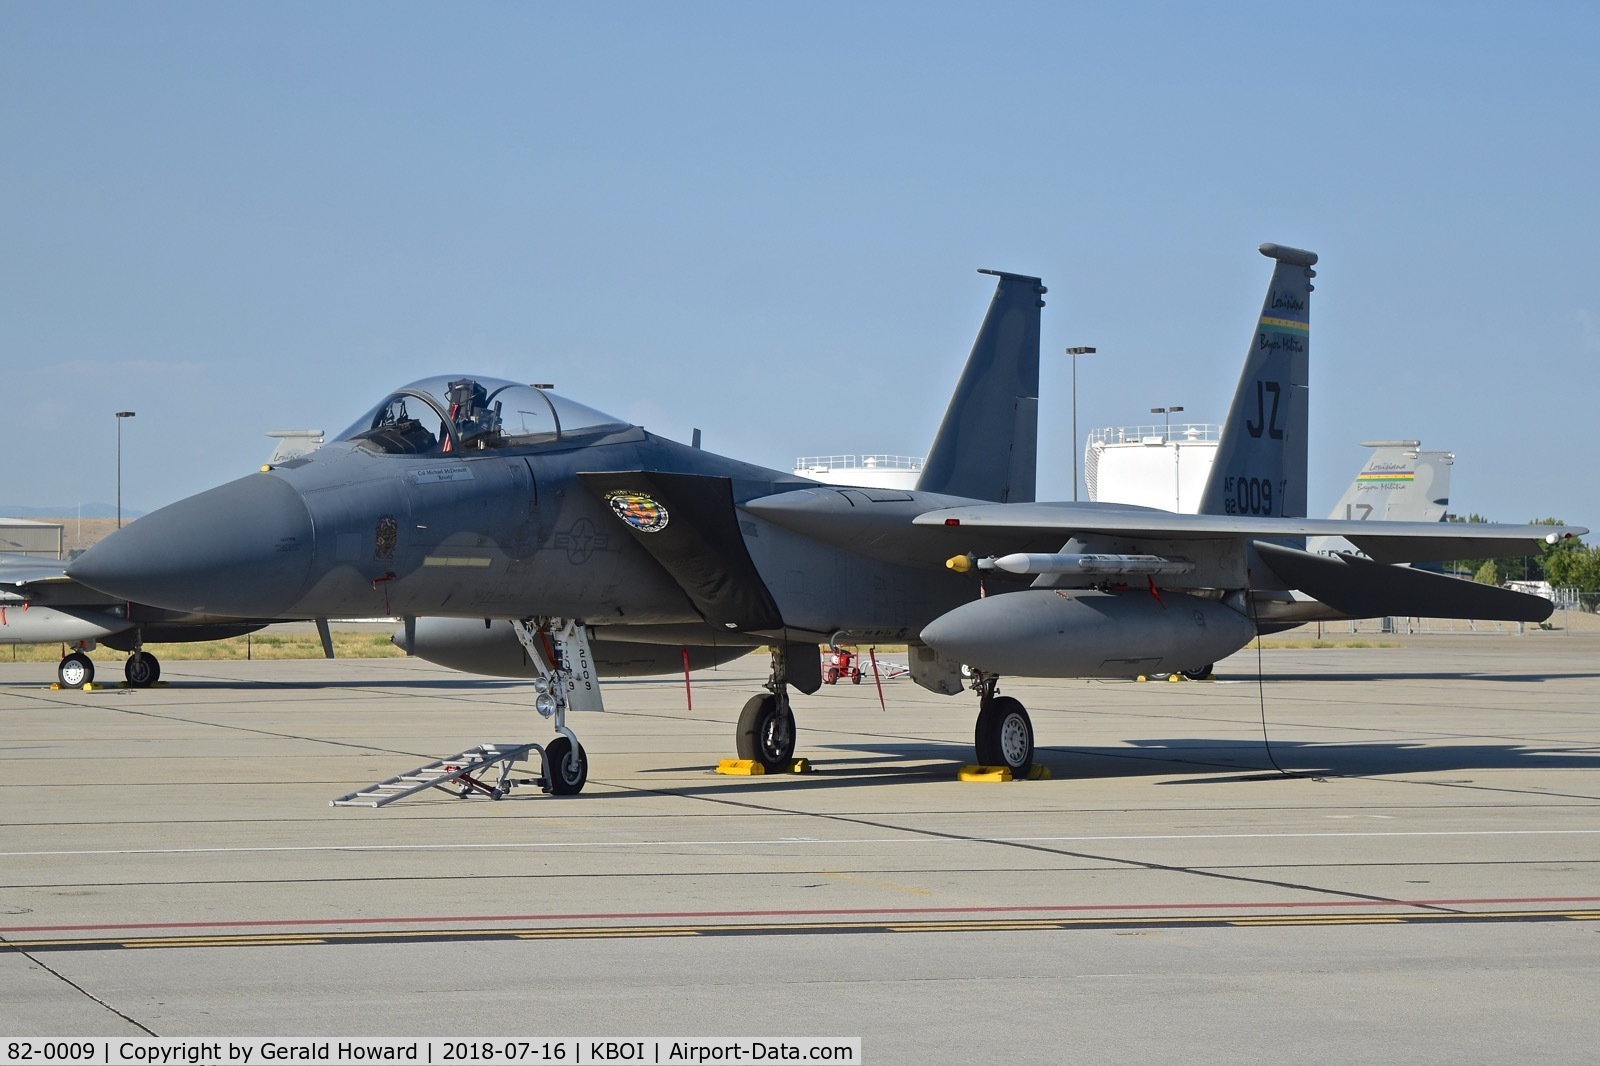 82-0009, 1982 McDonnell Douglas F-15C Eagle C/N 0820/C240, Parked on the Idaho ANG ramp. 122nd Fighter Sq. 